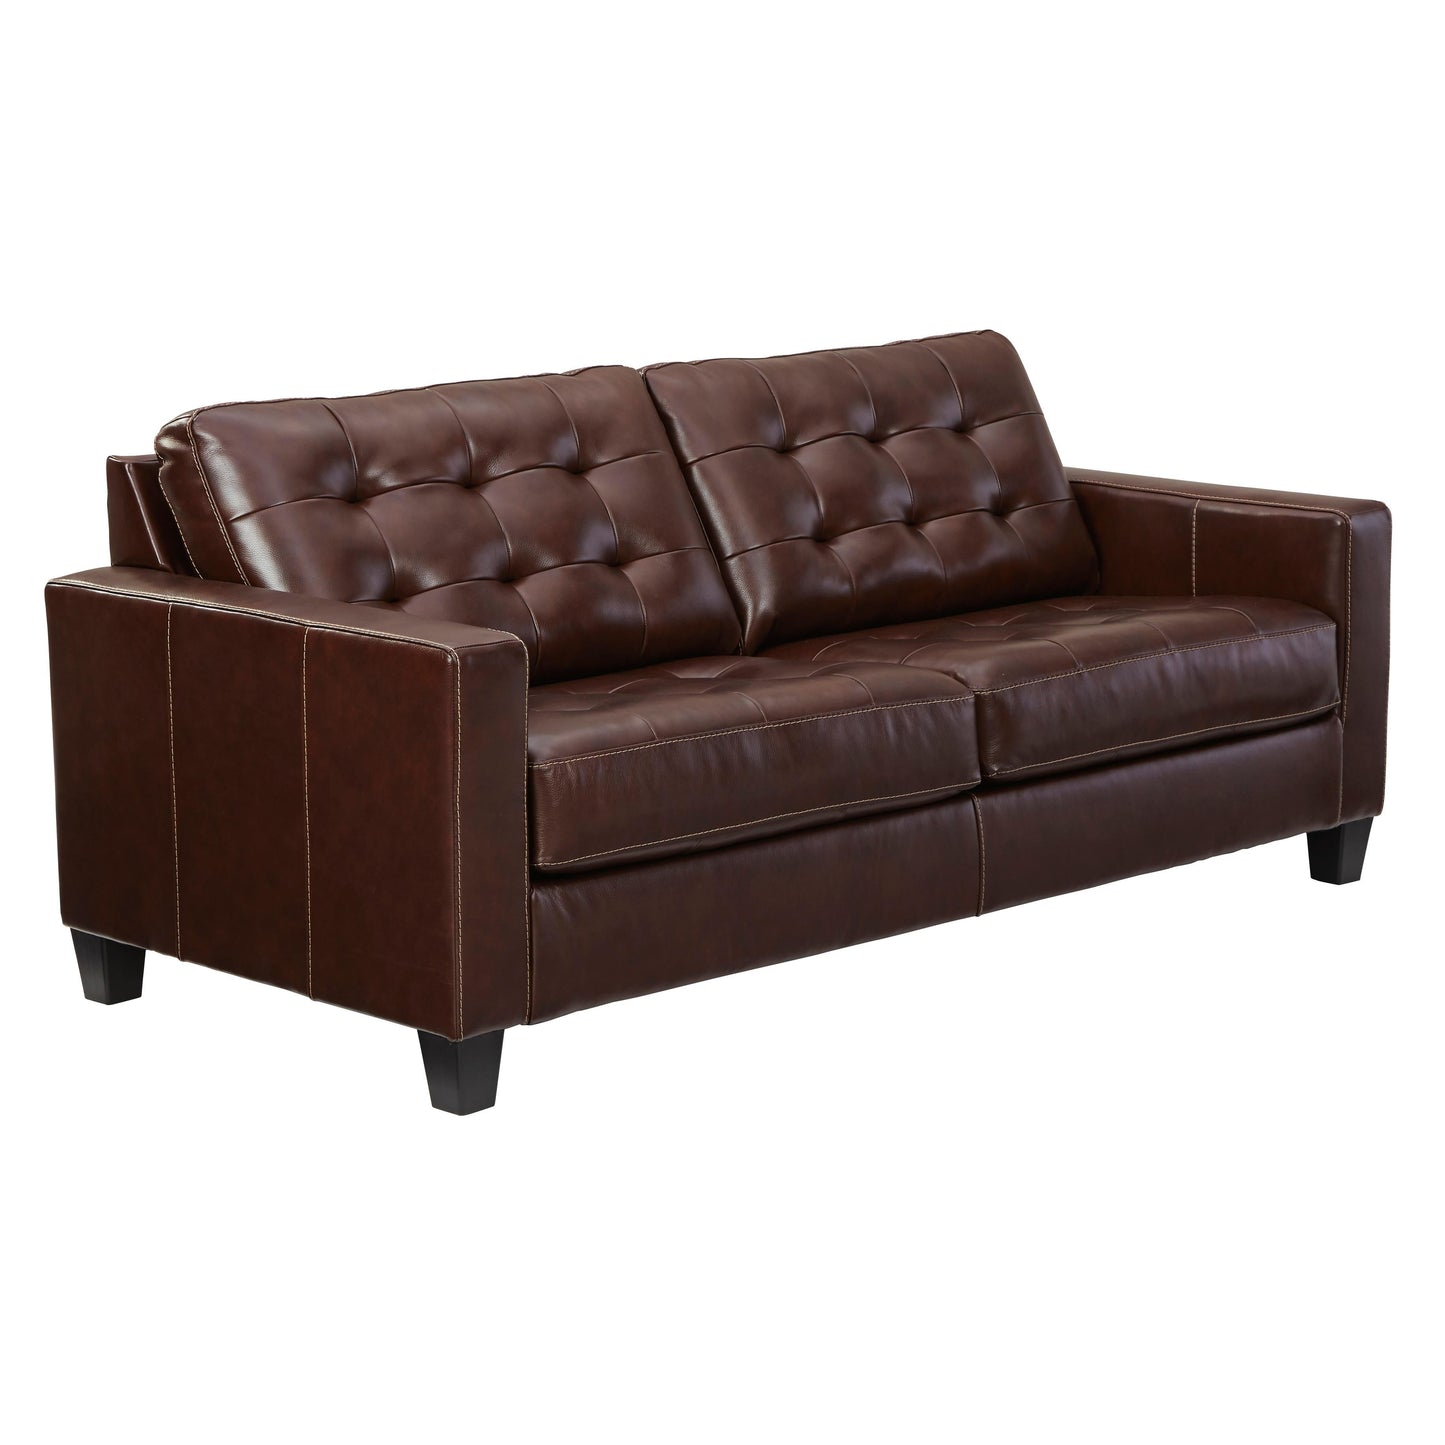 Signature Design by Ashley Altonbury Leather Match Queen Sofabed 8750439